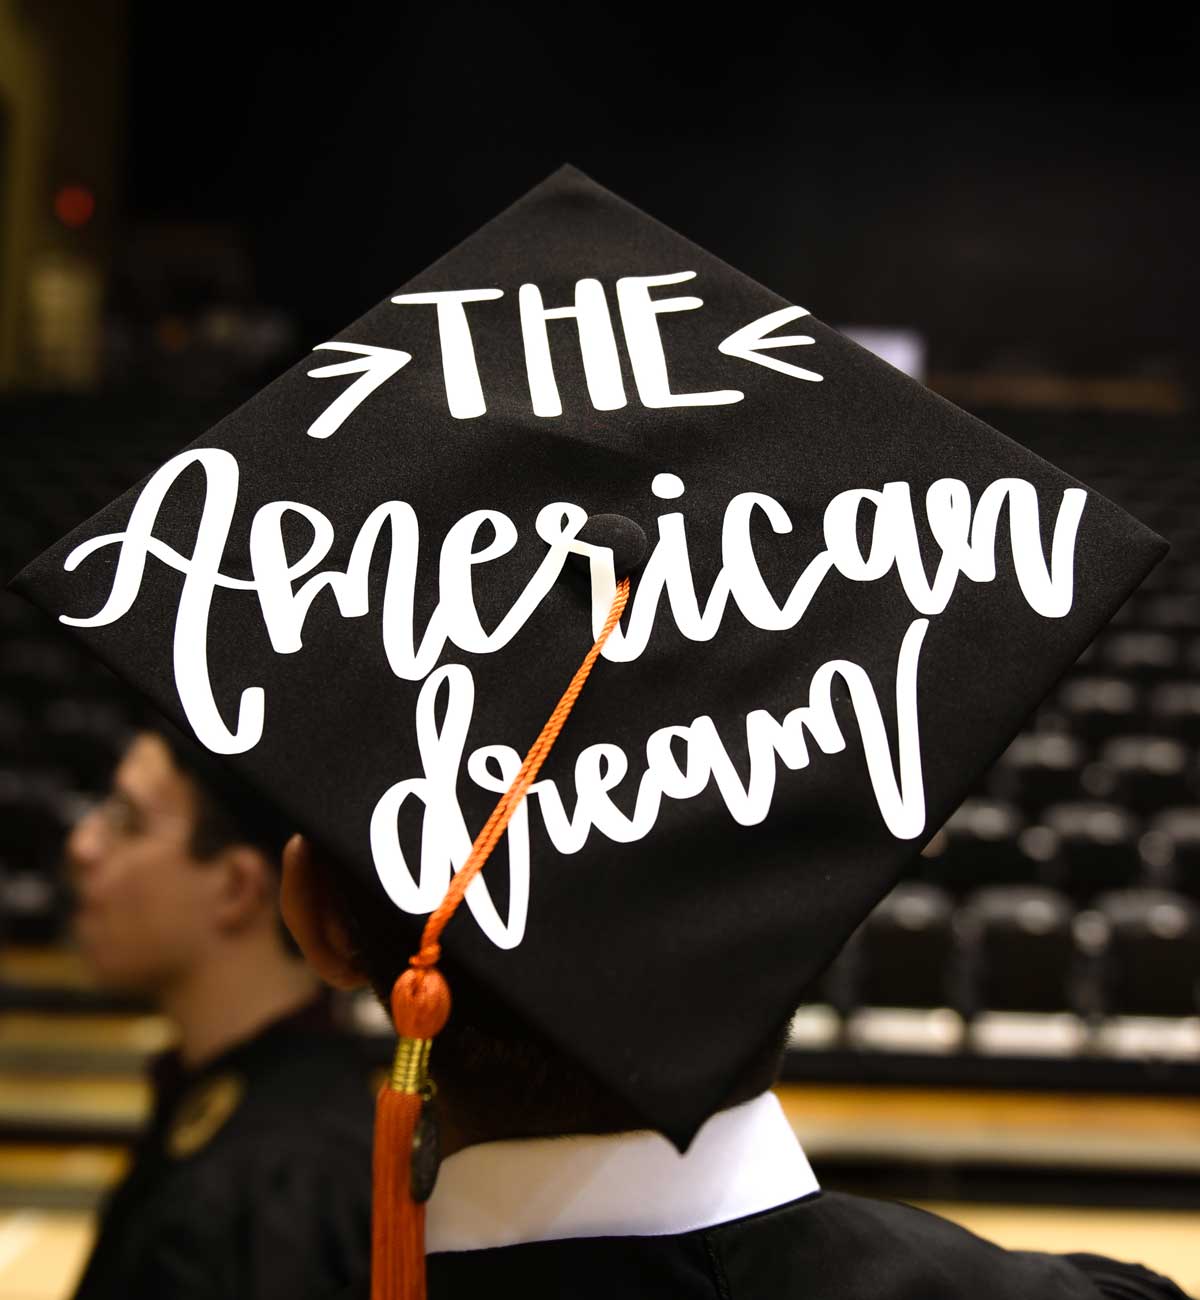 Grad cap decorated with text: The American Dream